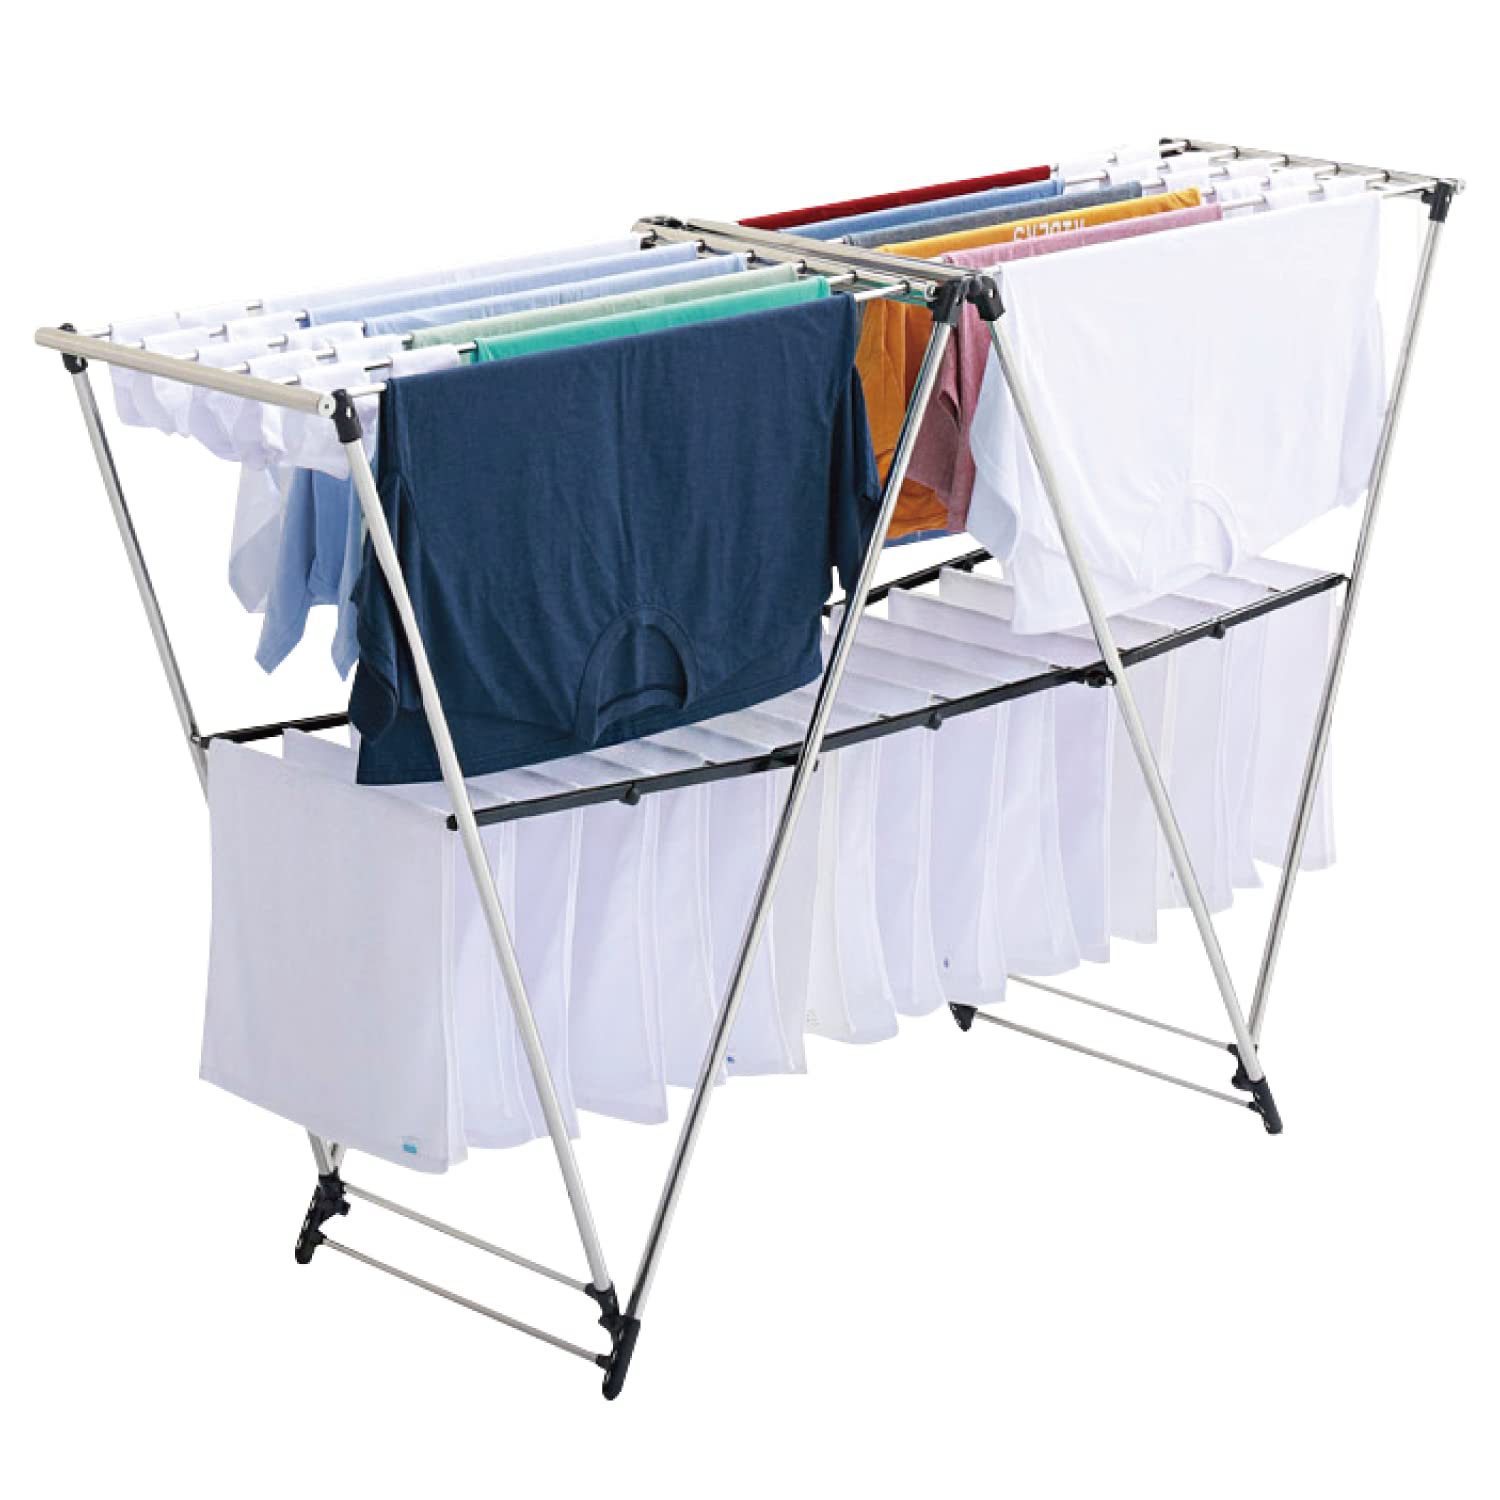 Clothes Drying Rack, 4-Tier Oversize Collapsible Clothes Drying  Rack,Stainless Steel Laundry Garment Dryer Stand Stainless Steel  Free-Standing Laundry